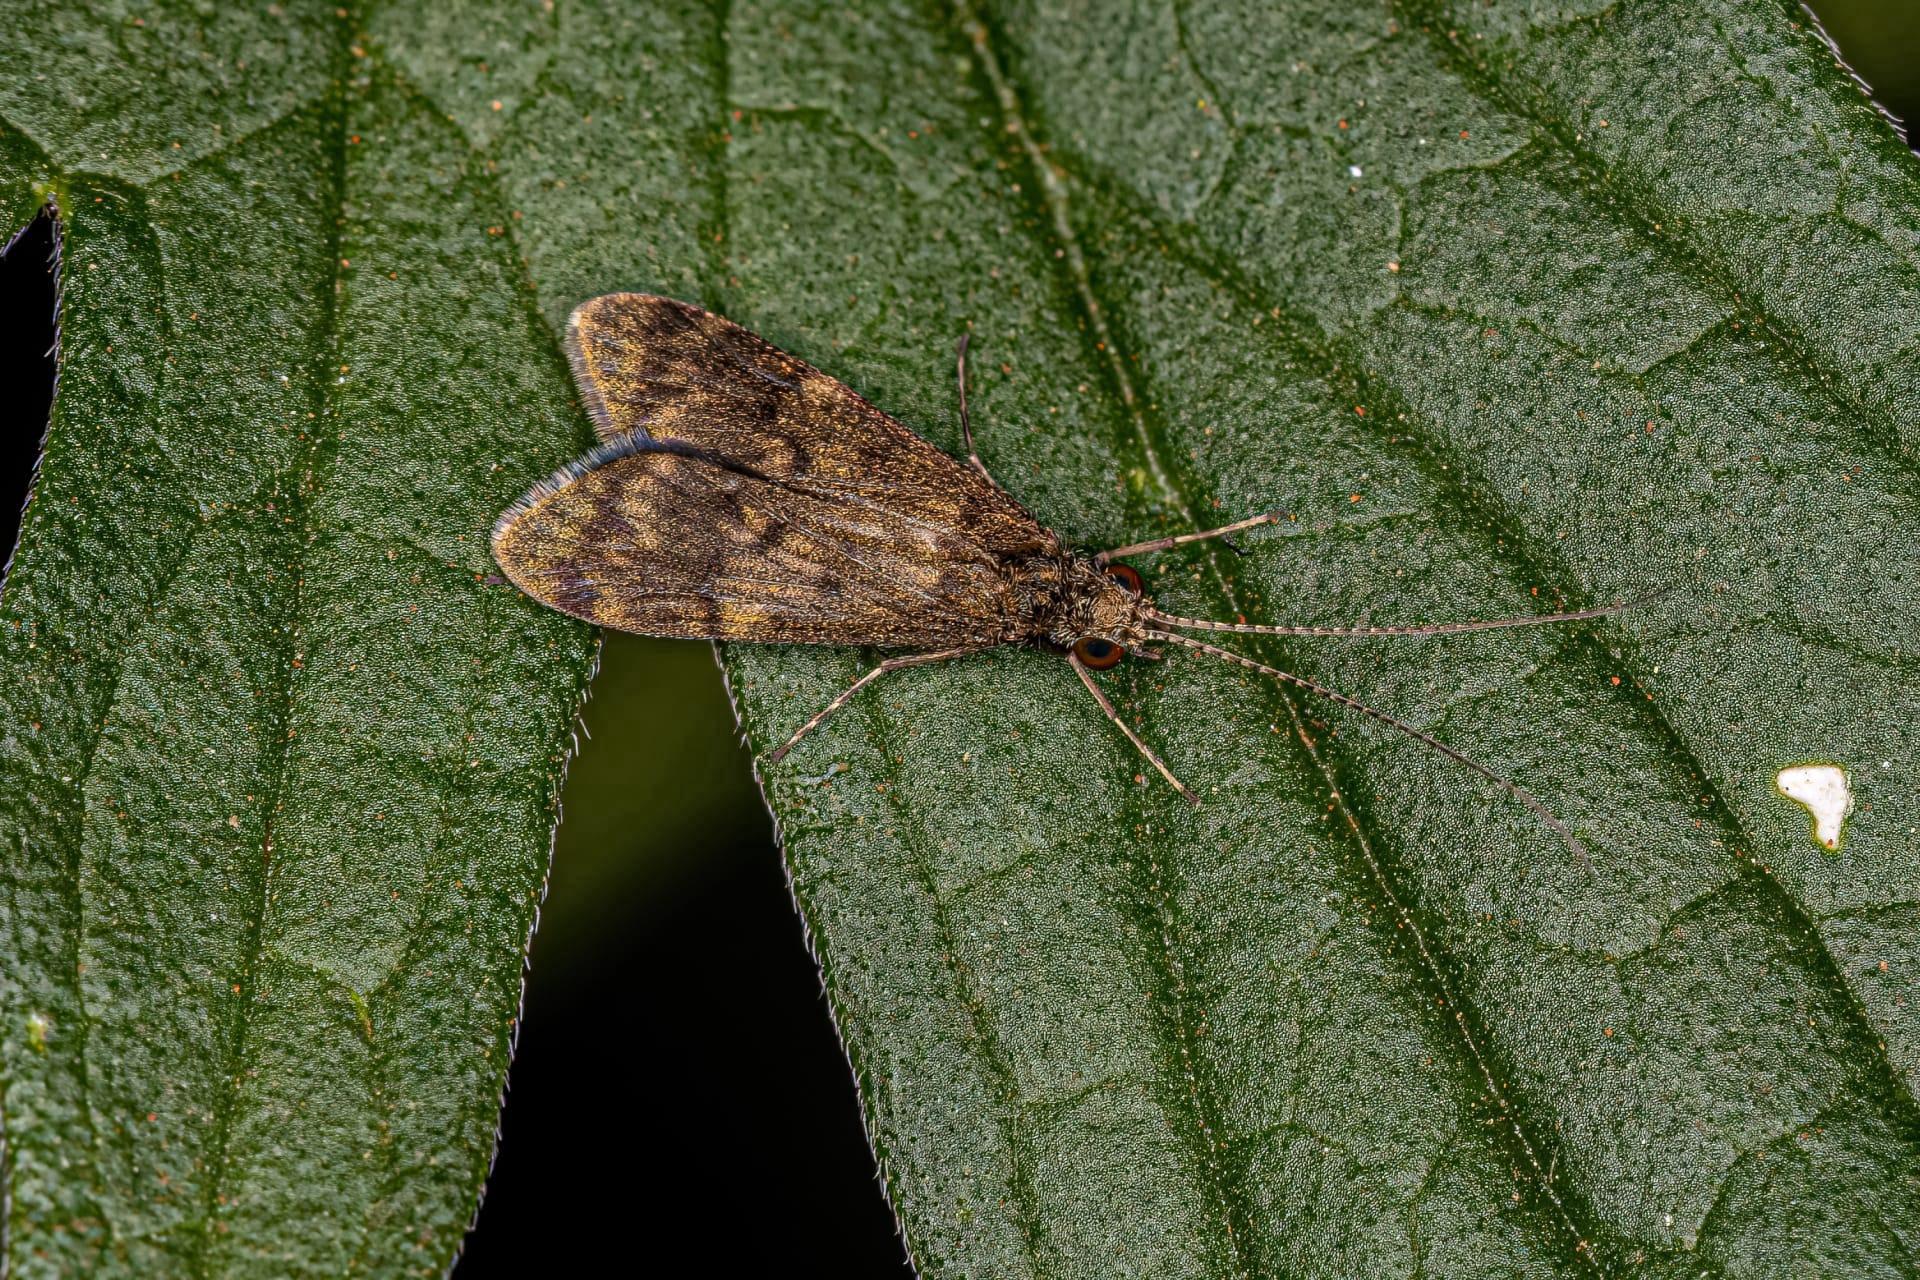 Caddisfly pictures